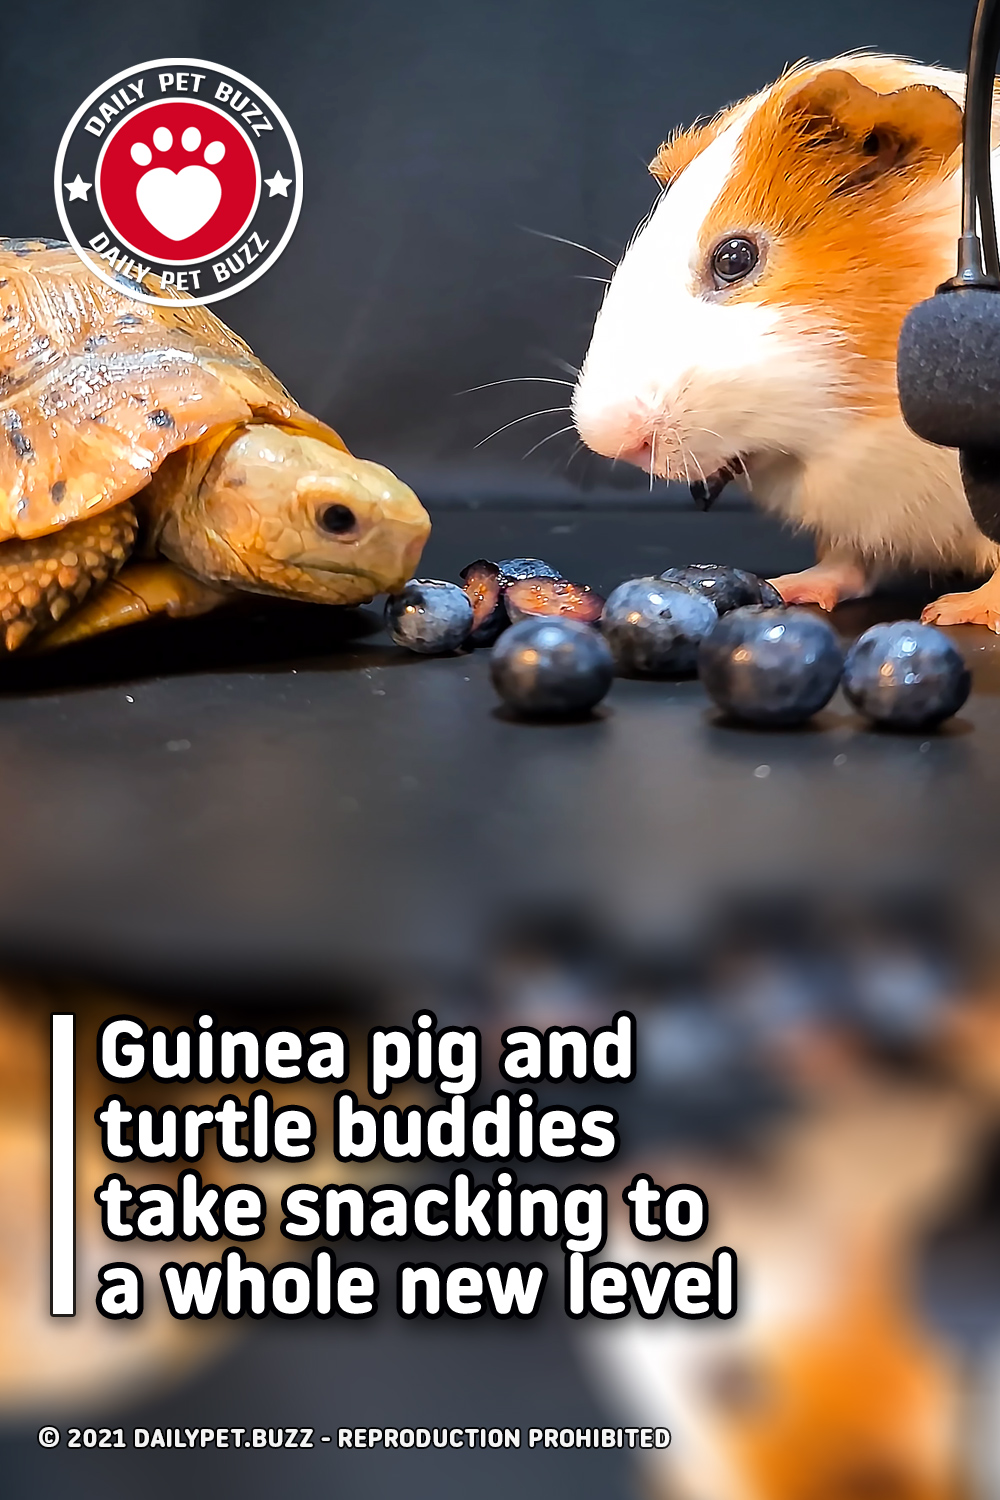 Guinea pig and turtle buddies take snacking to a whole new level